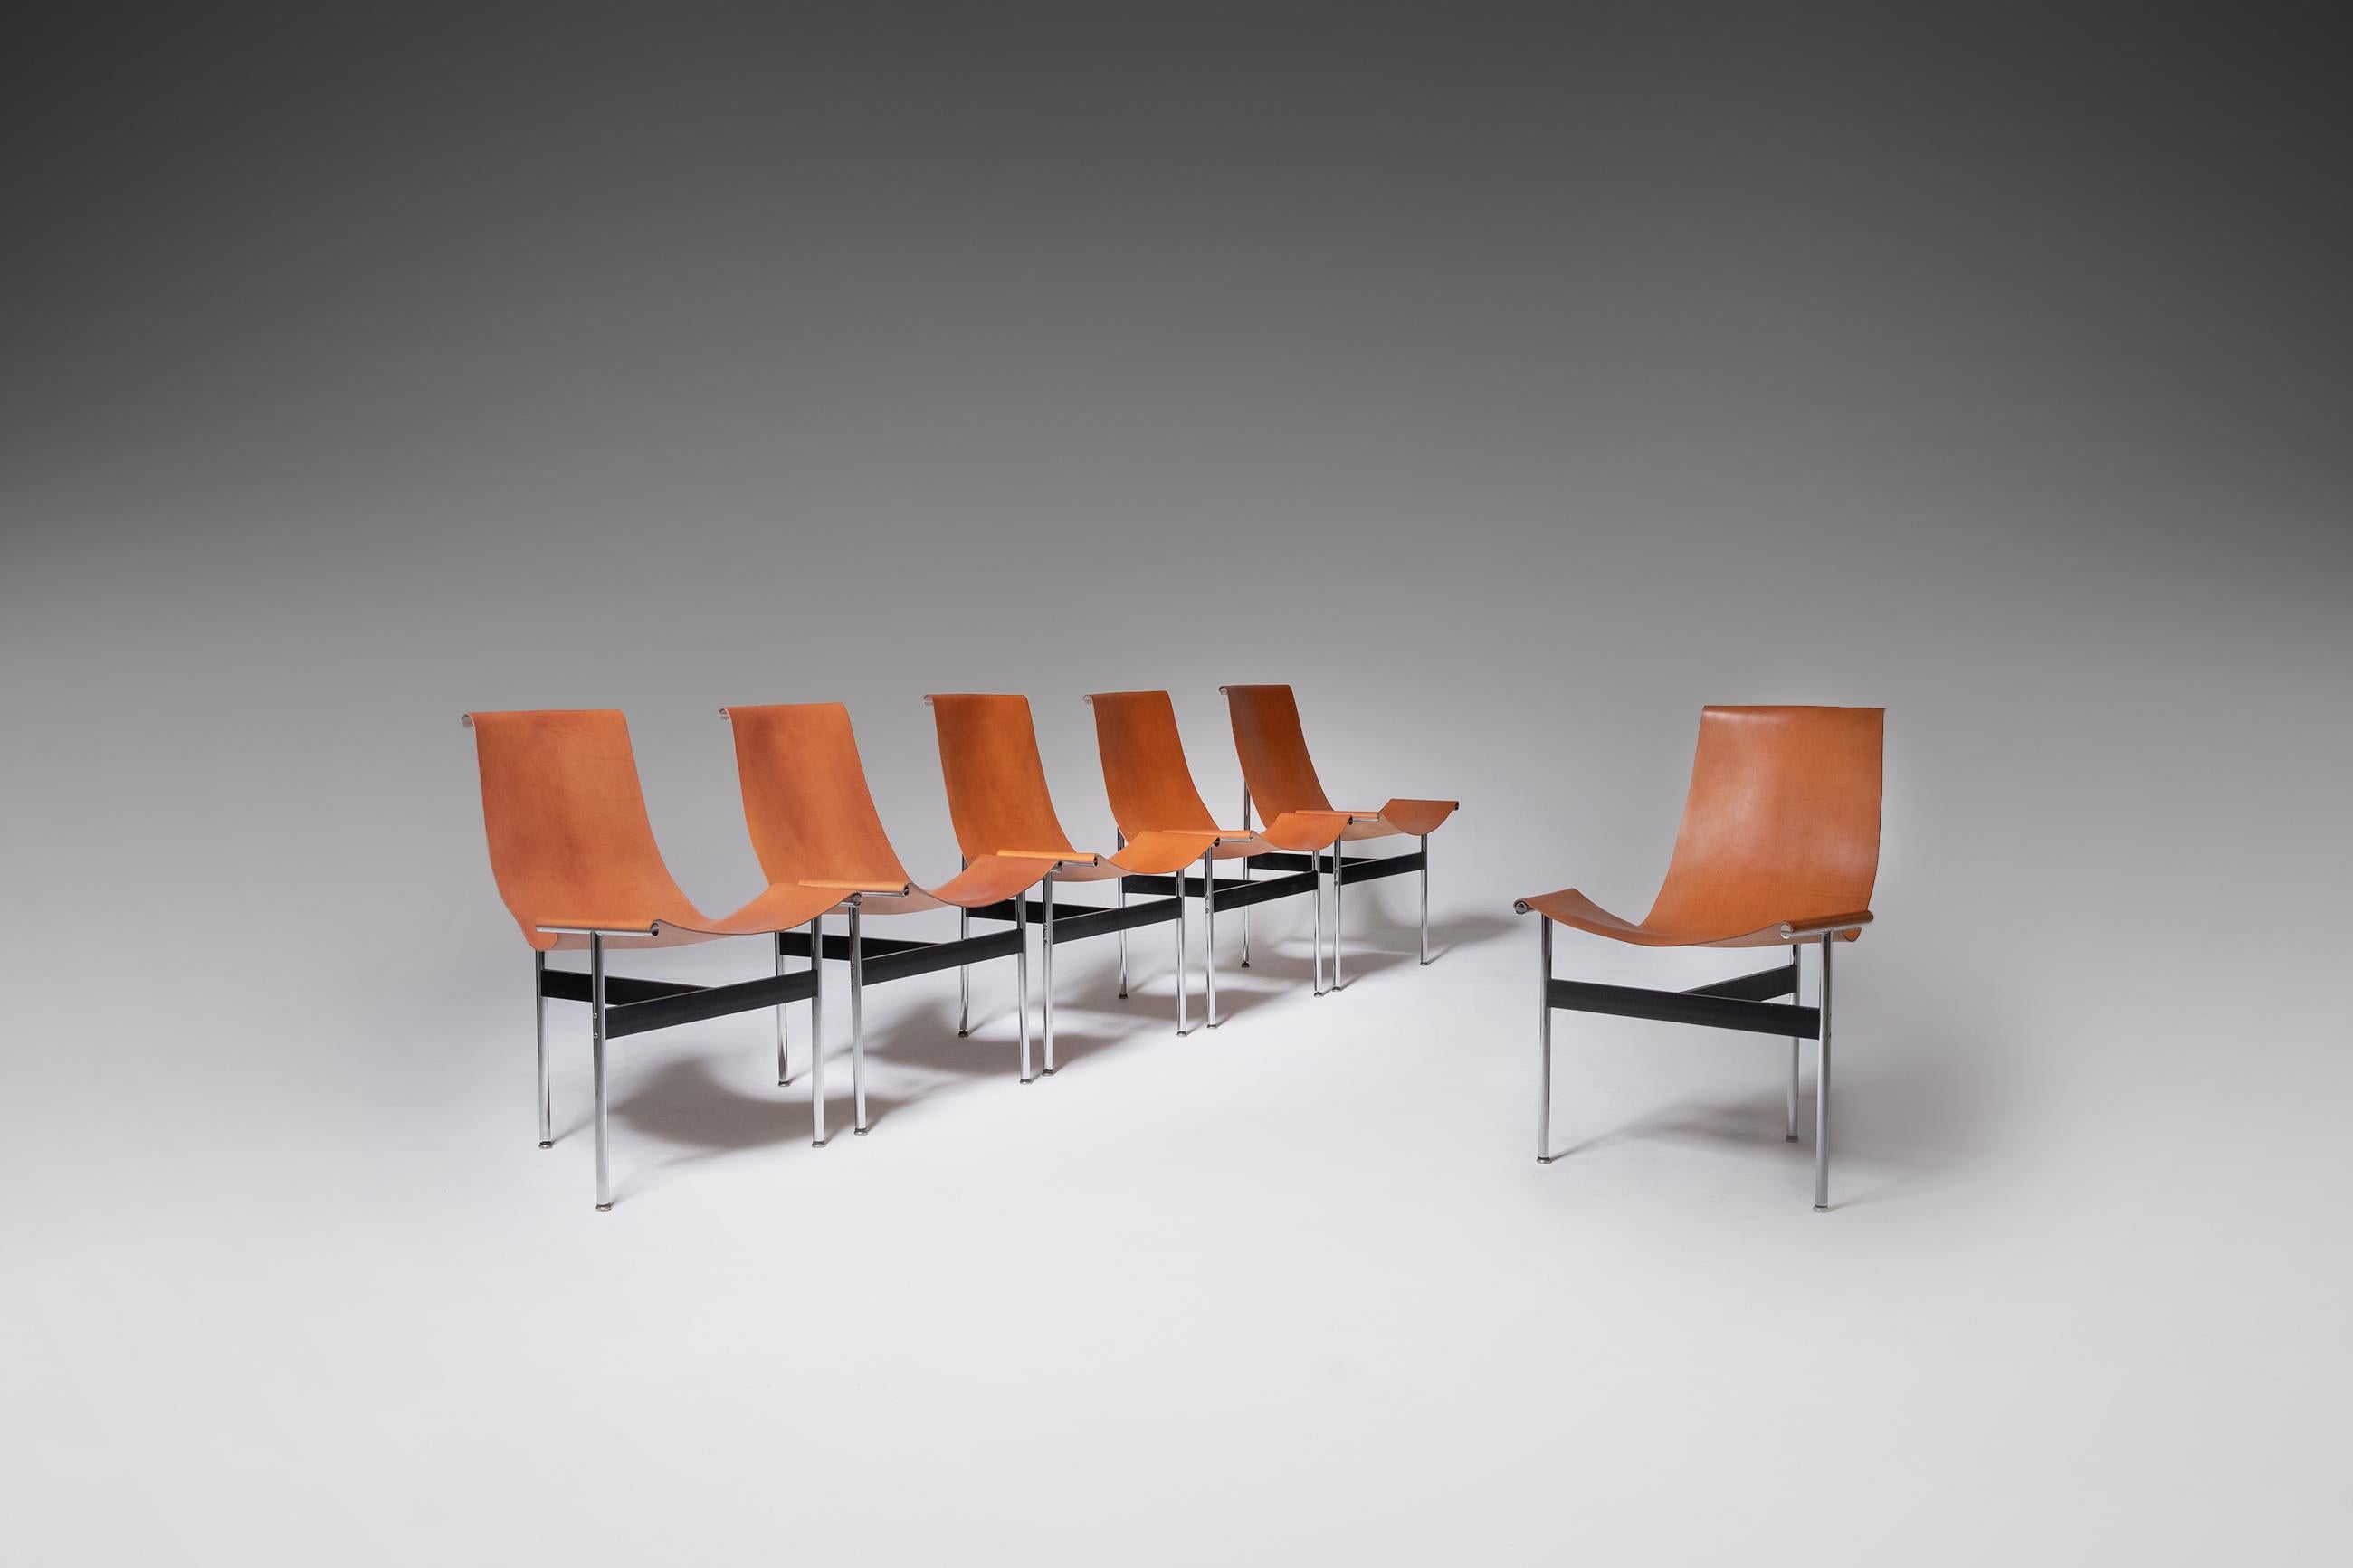 Set of six T-chairs dining chairs by William Katavolos, Ross Littell and Douglas Kelley, 1952. This is the European production; produced by ICF De Padova, the American production was made by Laverne International. Very strong sculptural and